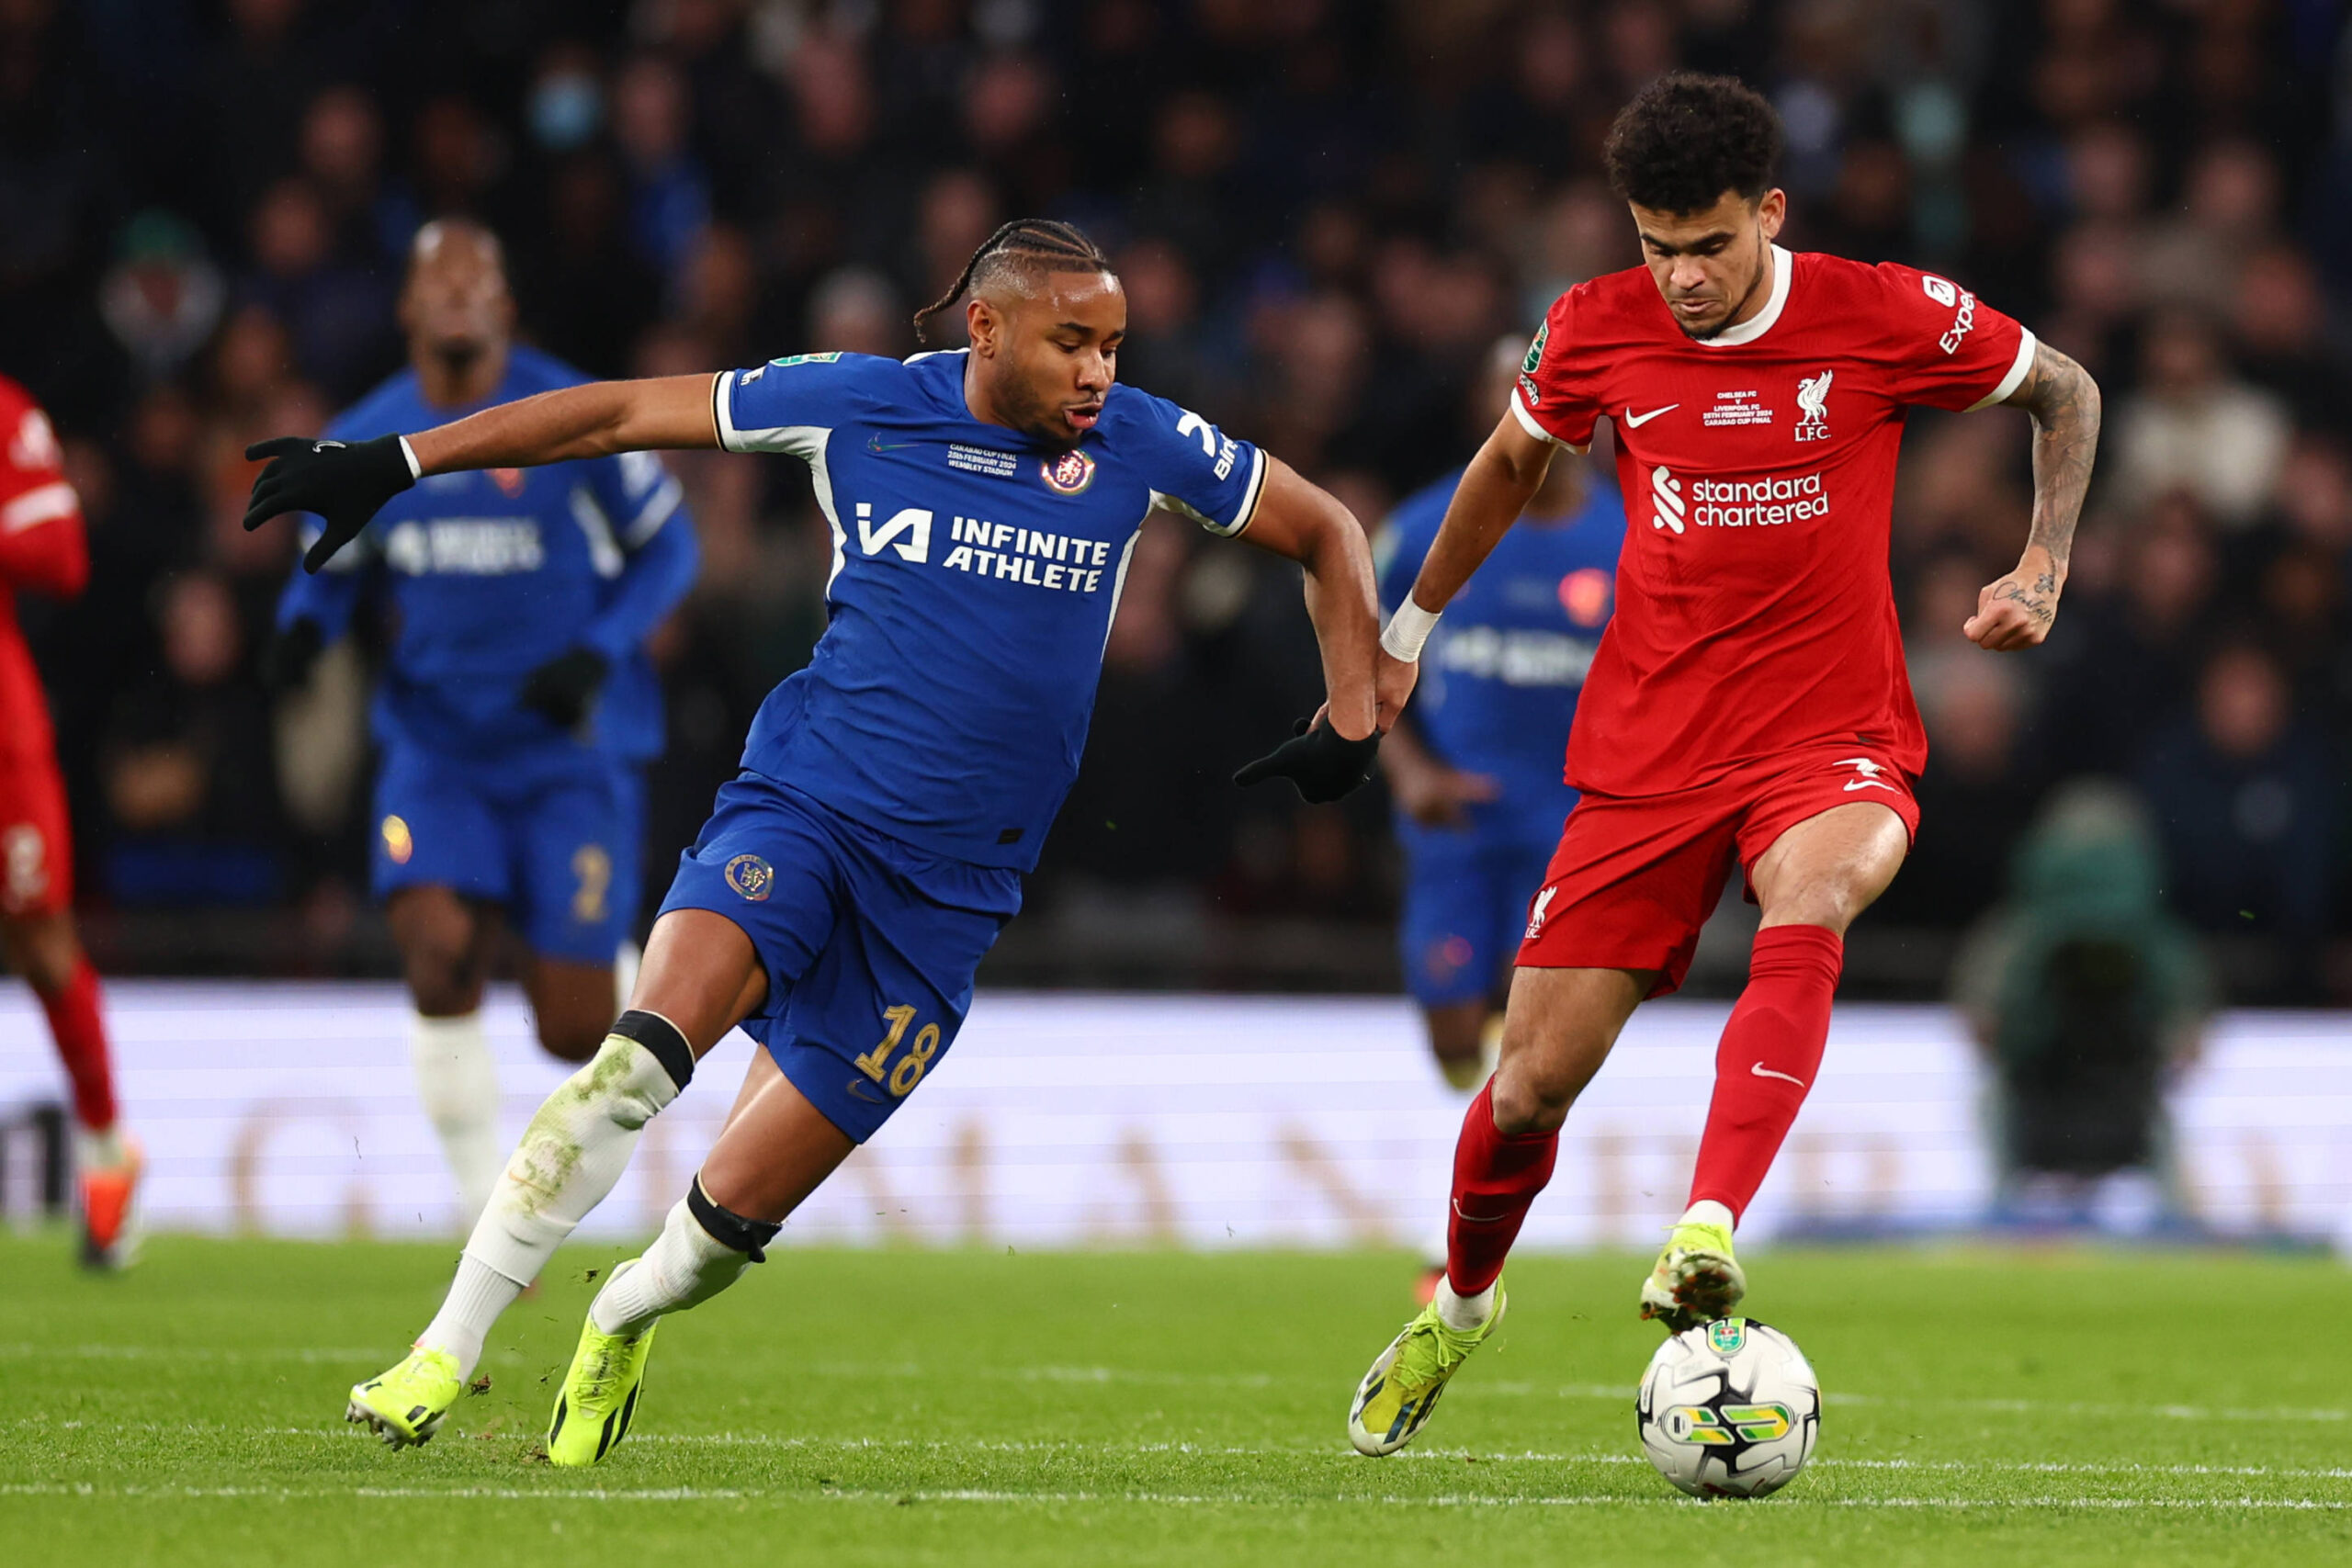 Chelsea's Christopher Nkunku fights for the ball with Liverpool's Luis Diaz